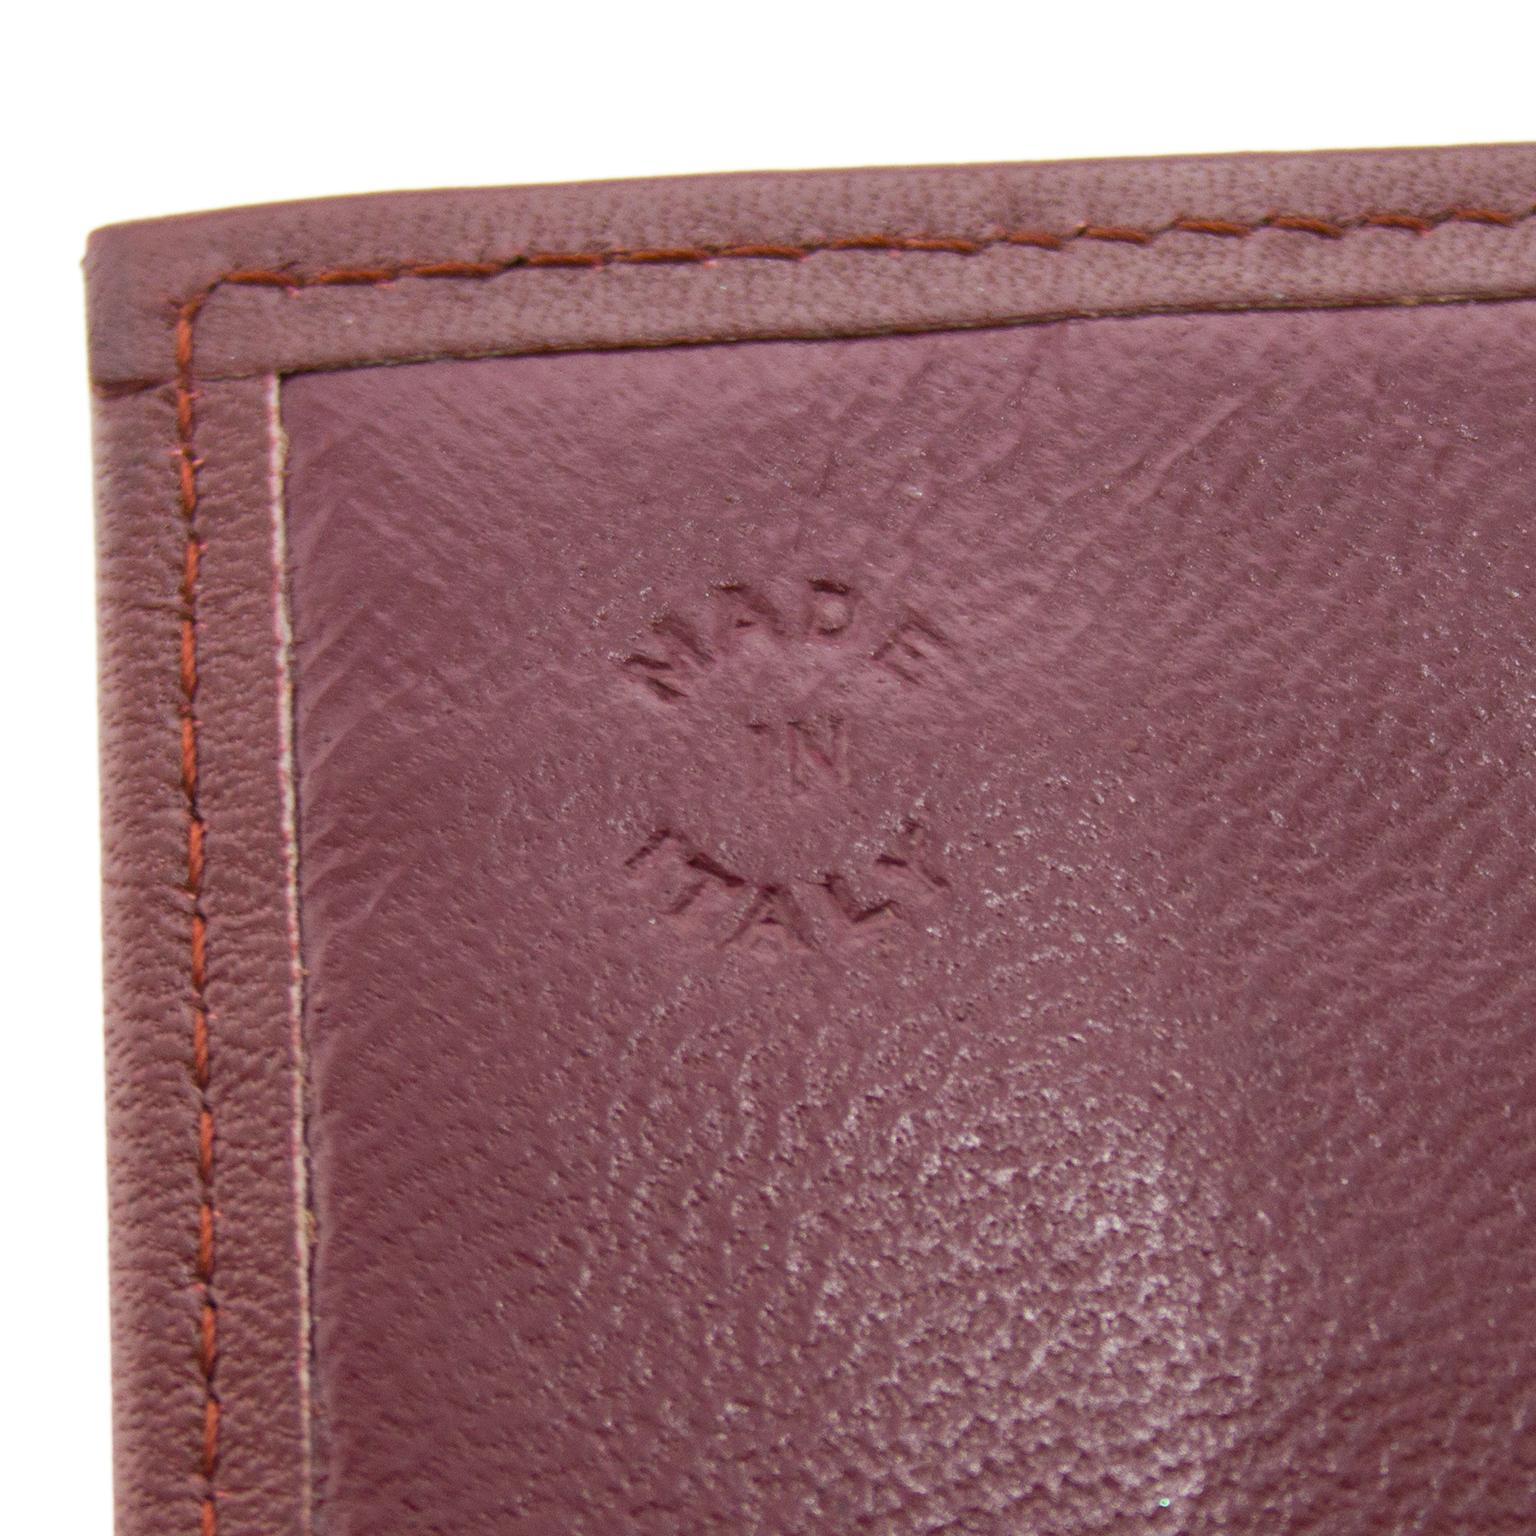 1980s Cartier Burgundy Leather Billfold Wallet With Fold-Over Closure 1